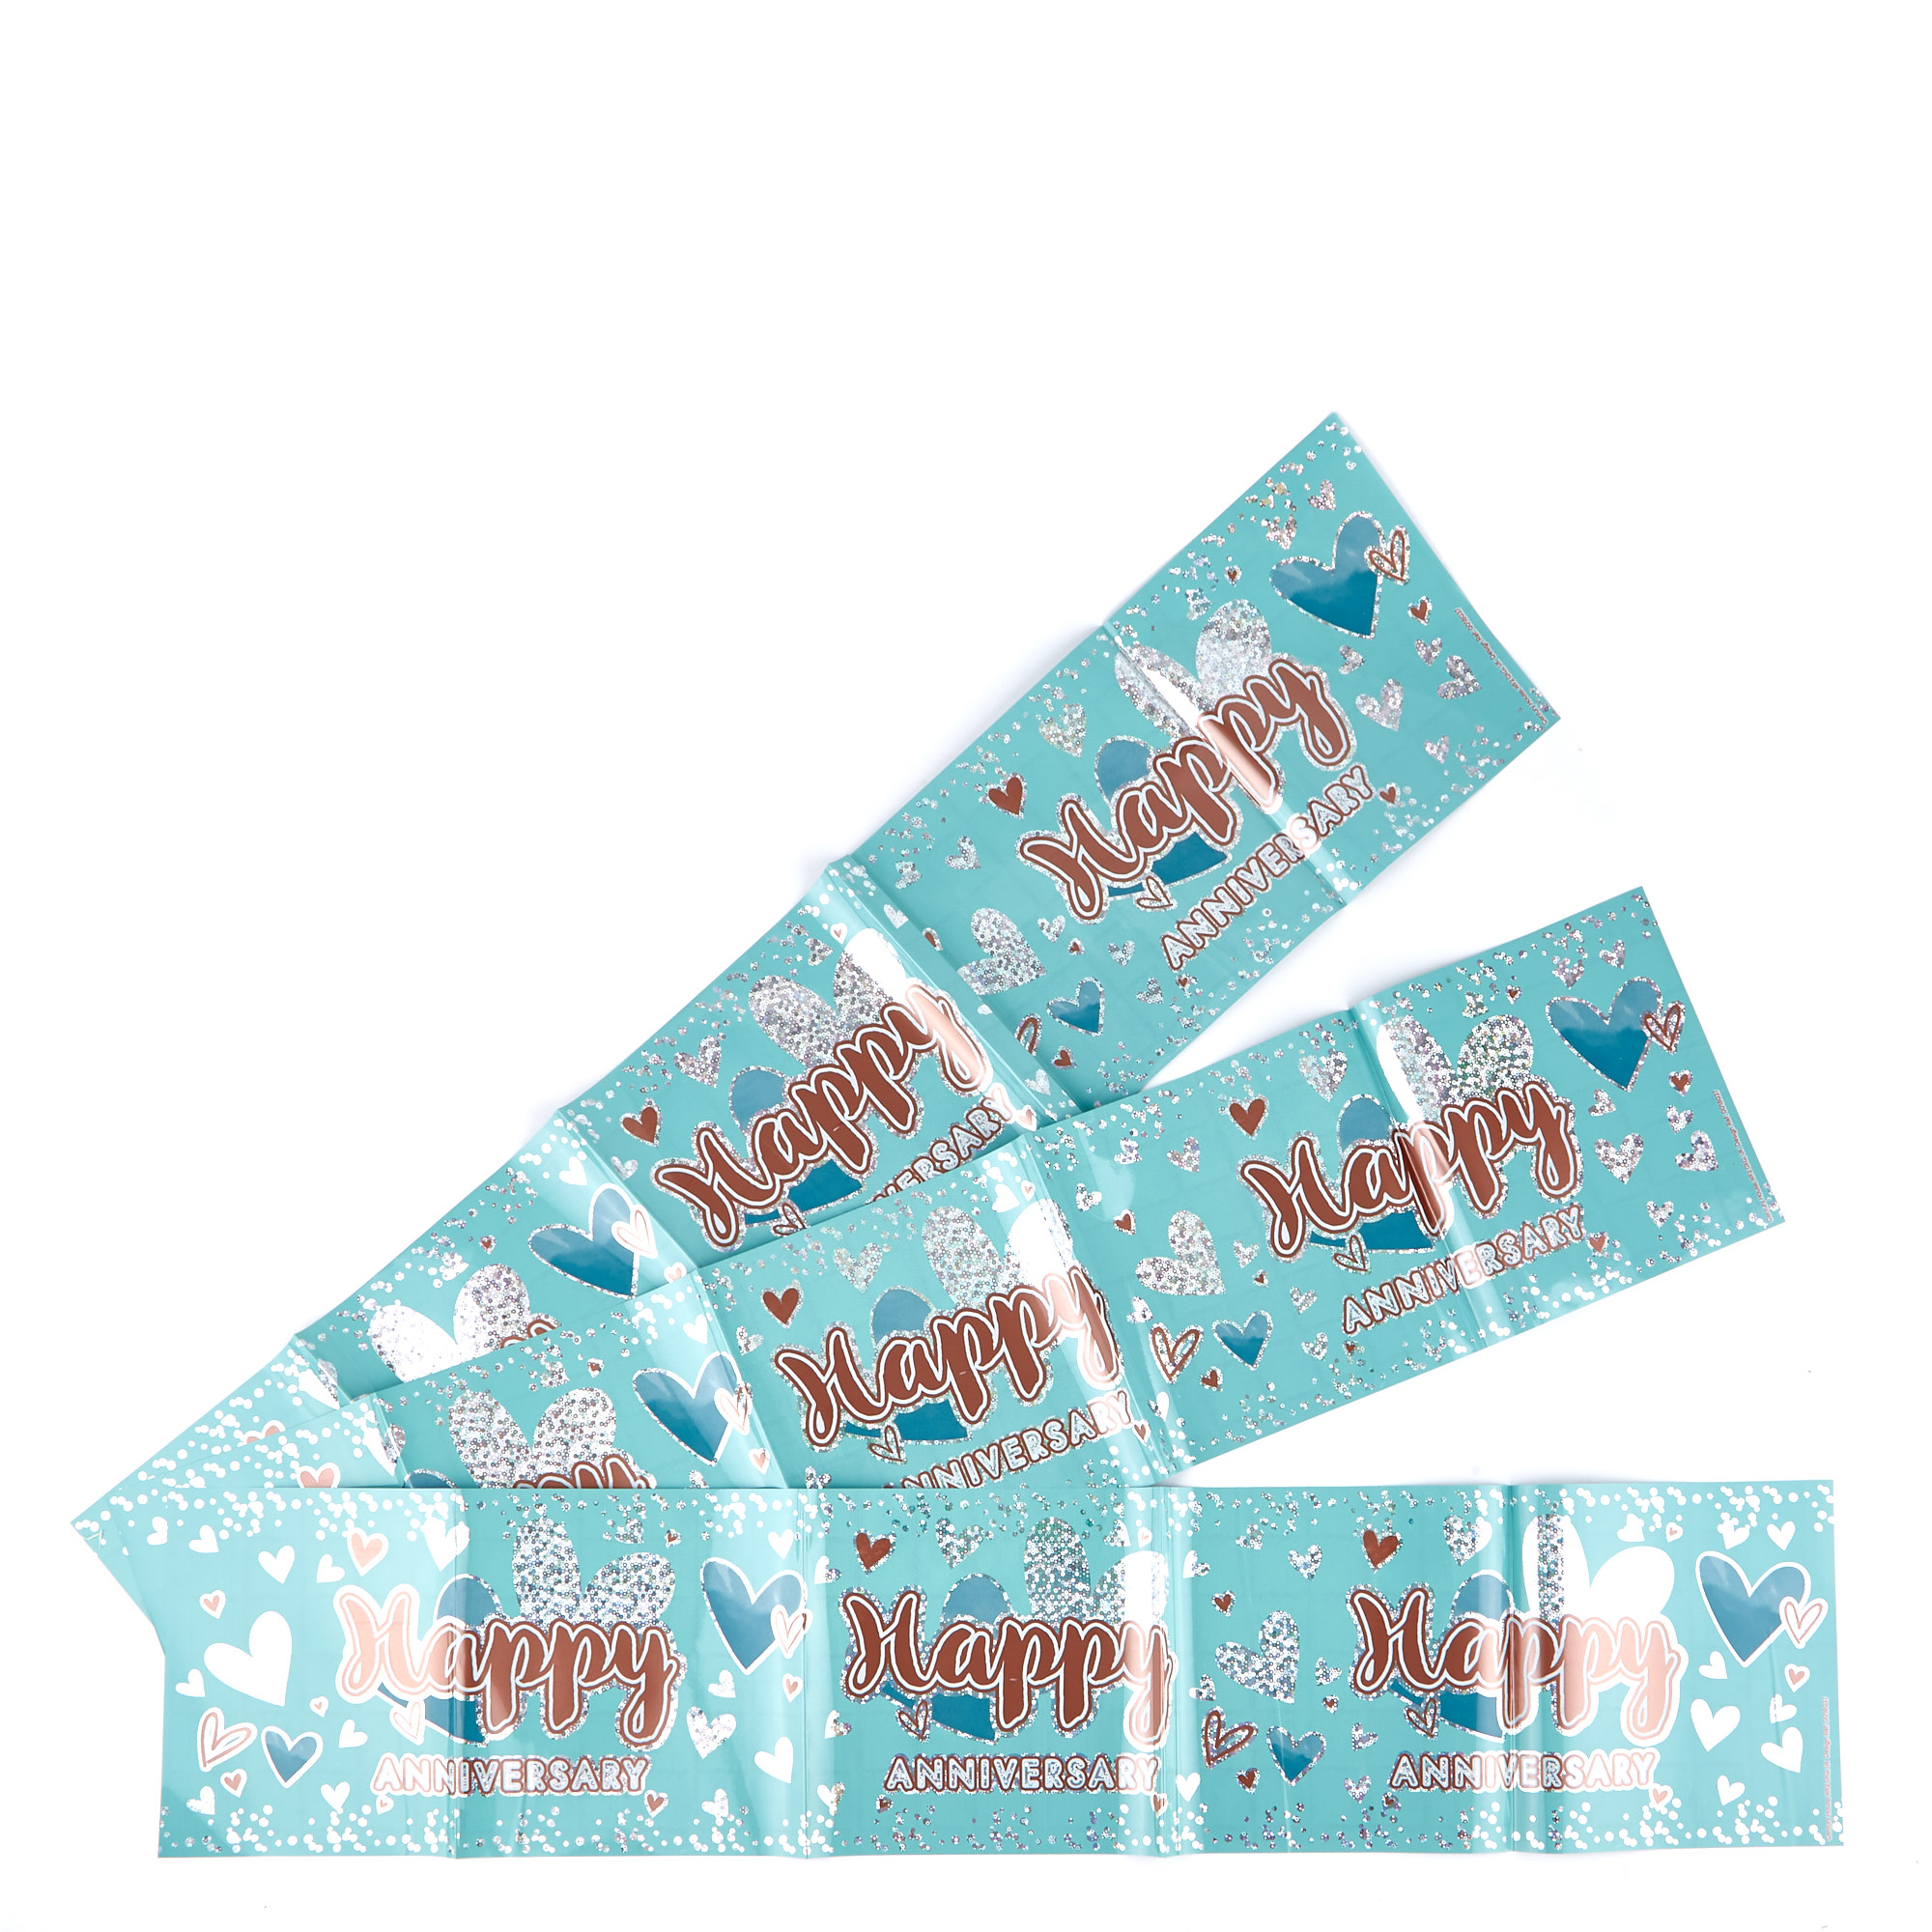 Happy Anniversary Party Banners - Pack Of 3